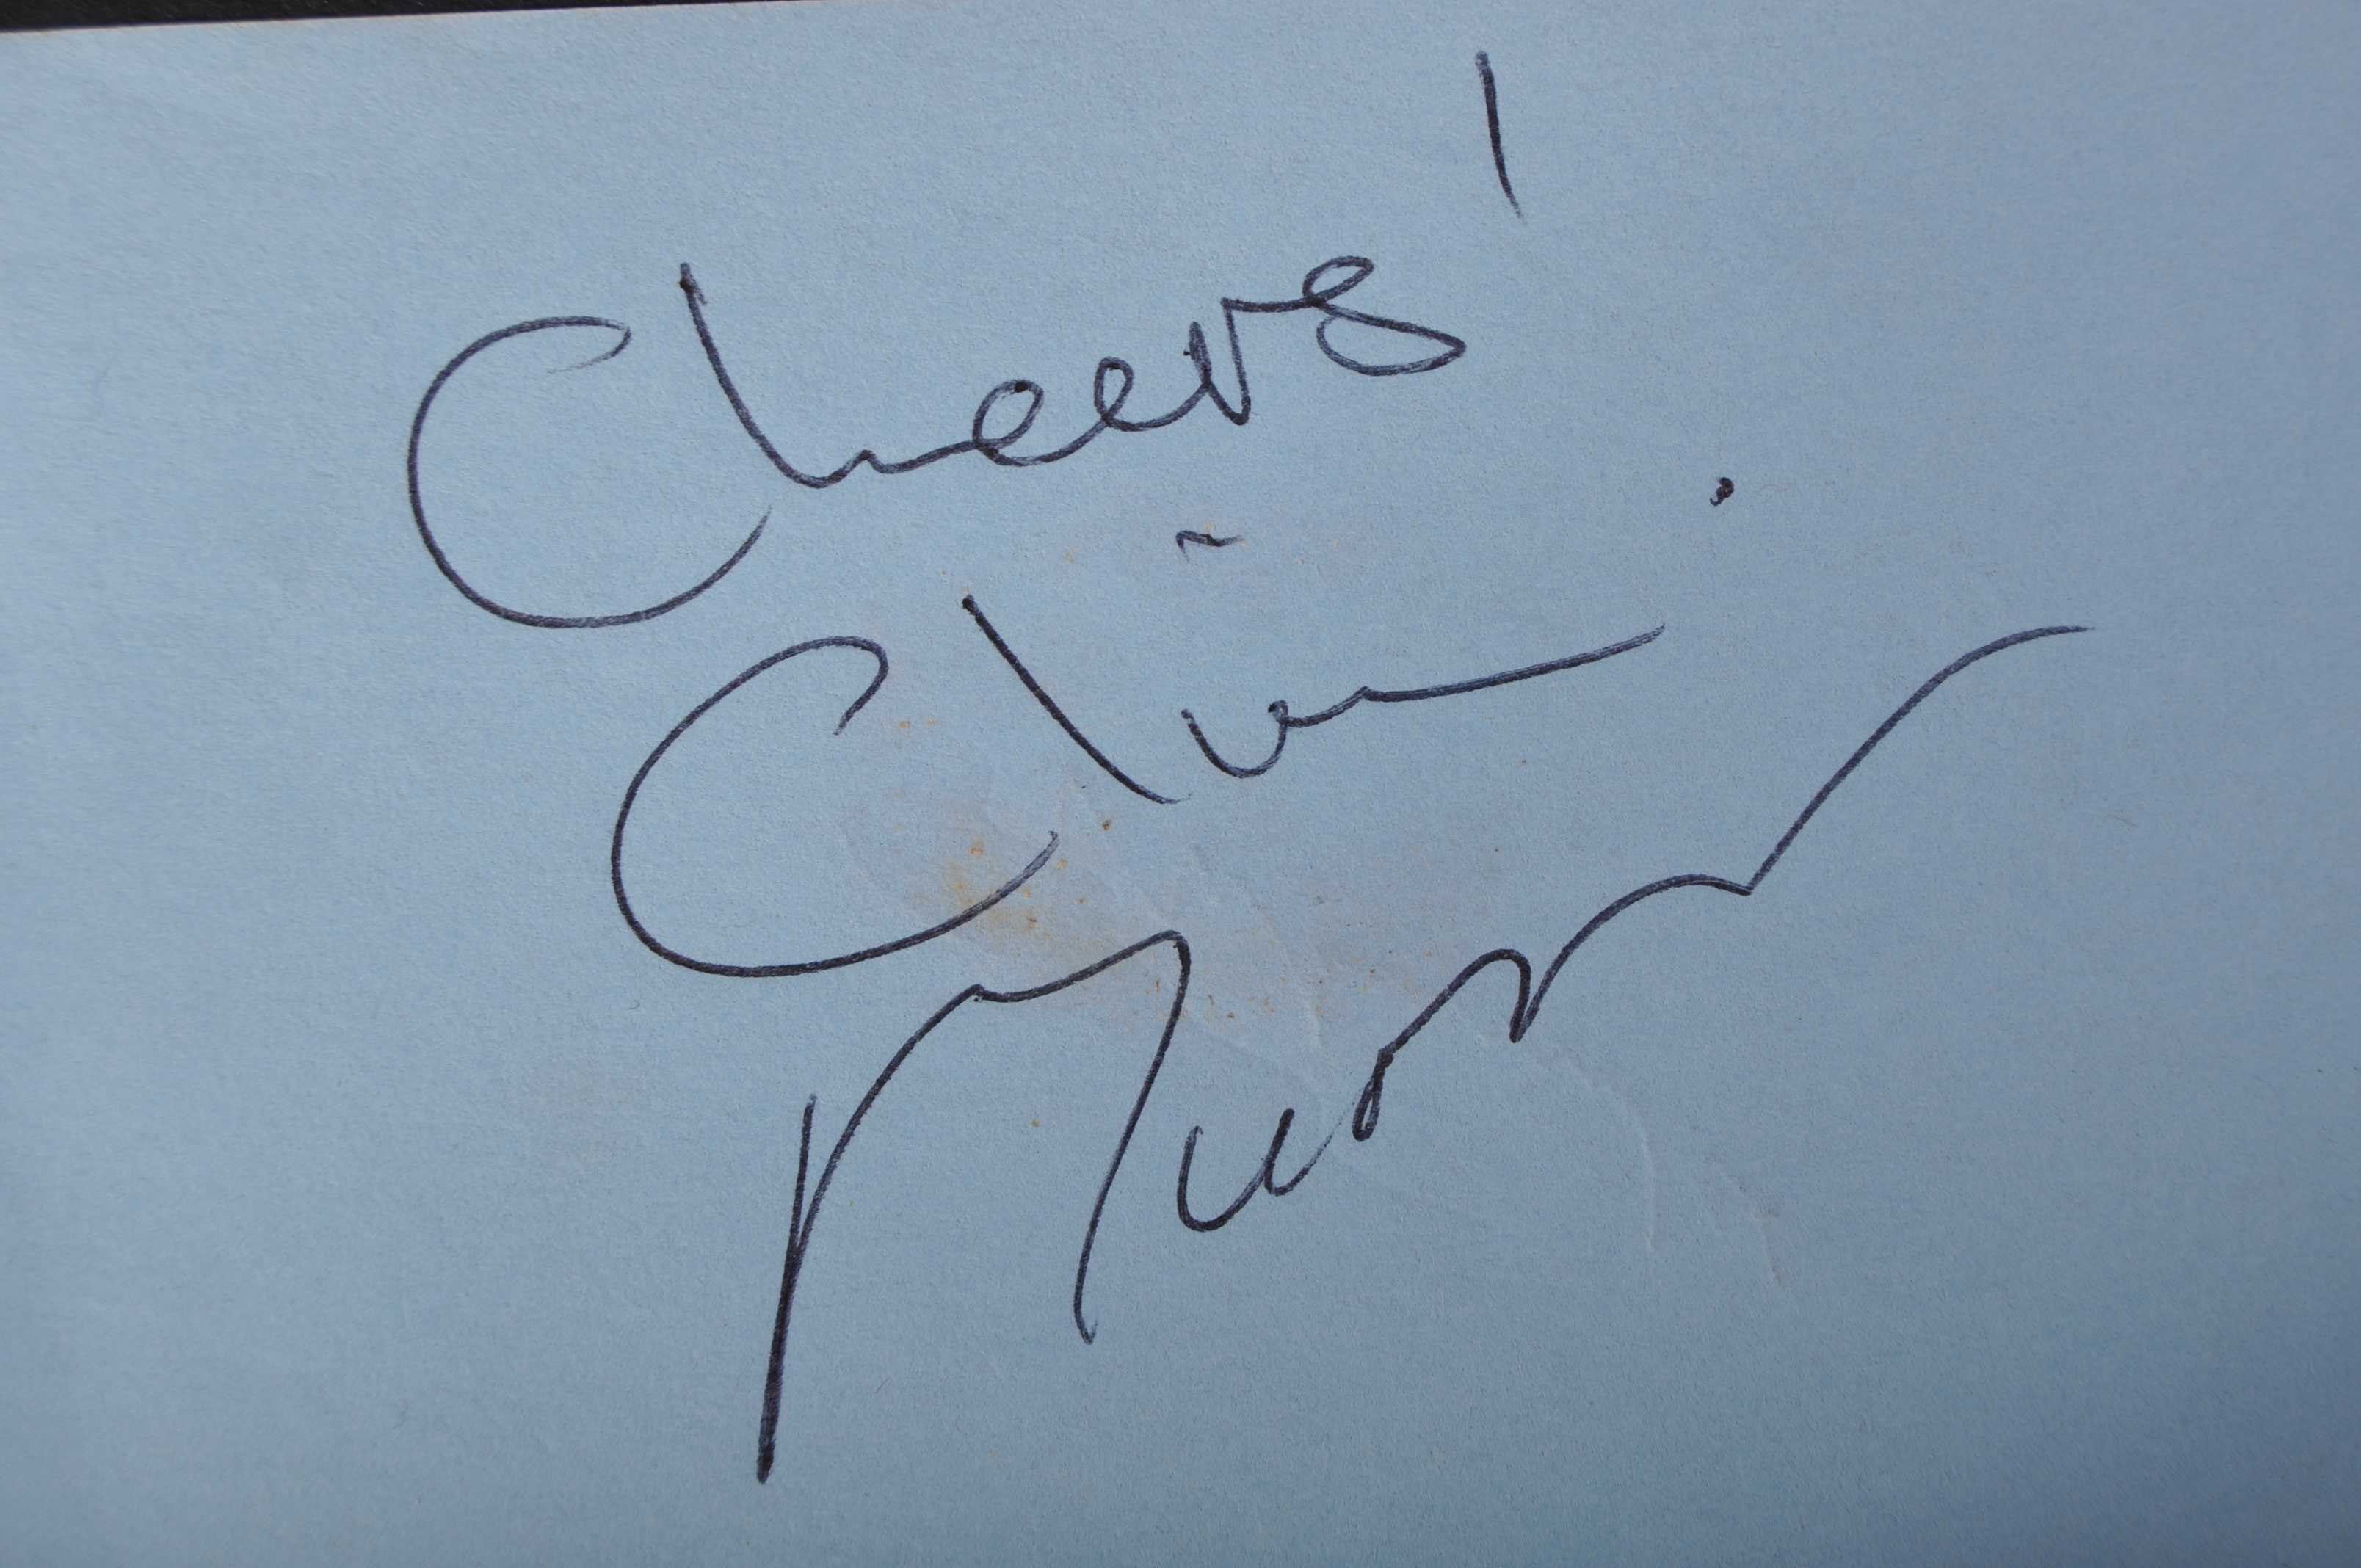 MUHAMMAD ALI (1942-2013) - 'THE GREATEST' - AUTOGRAPH ON ALBUM PAGE - Image 2 of 2